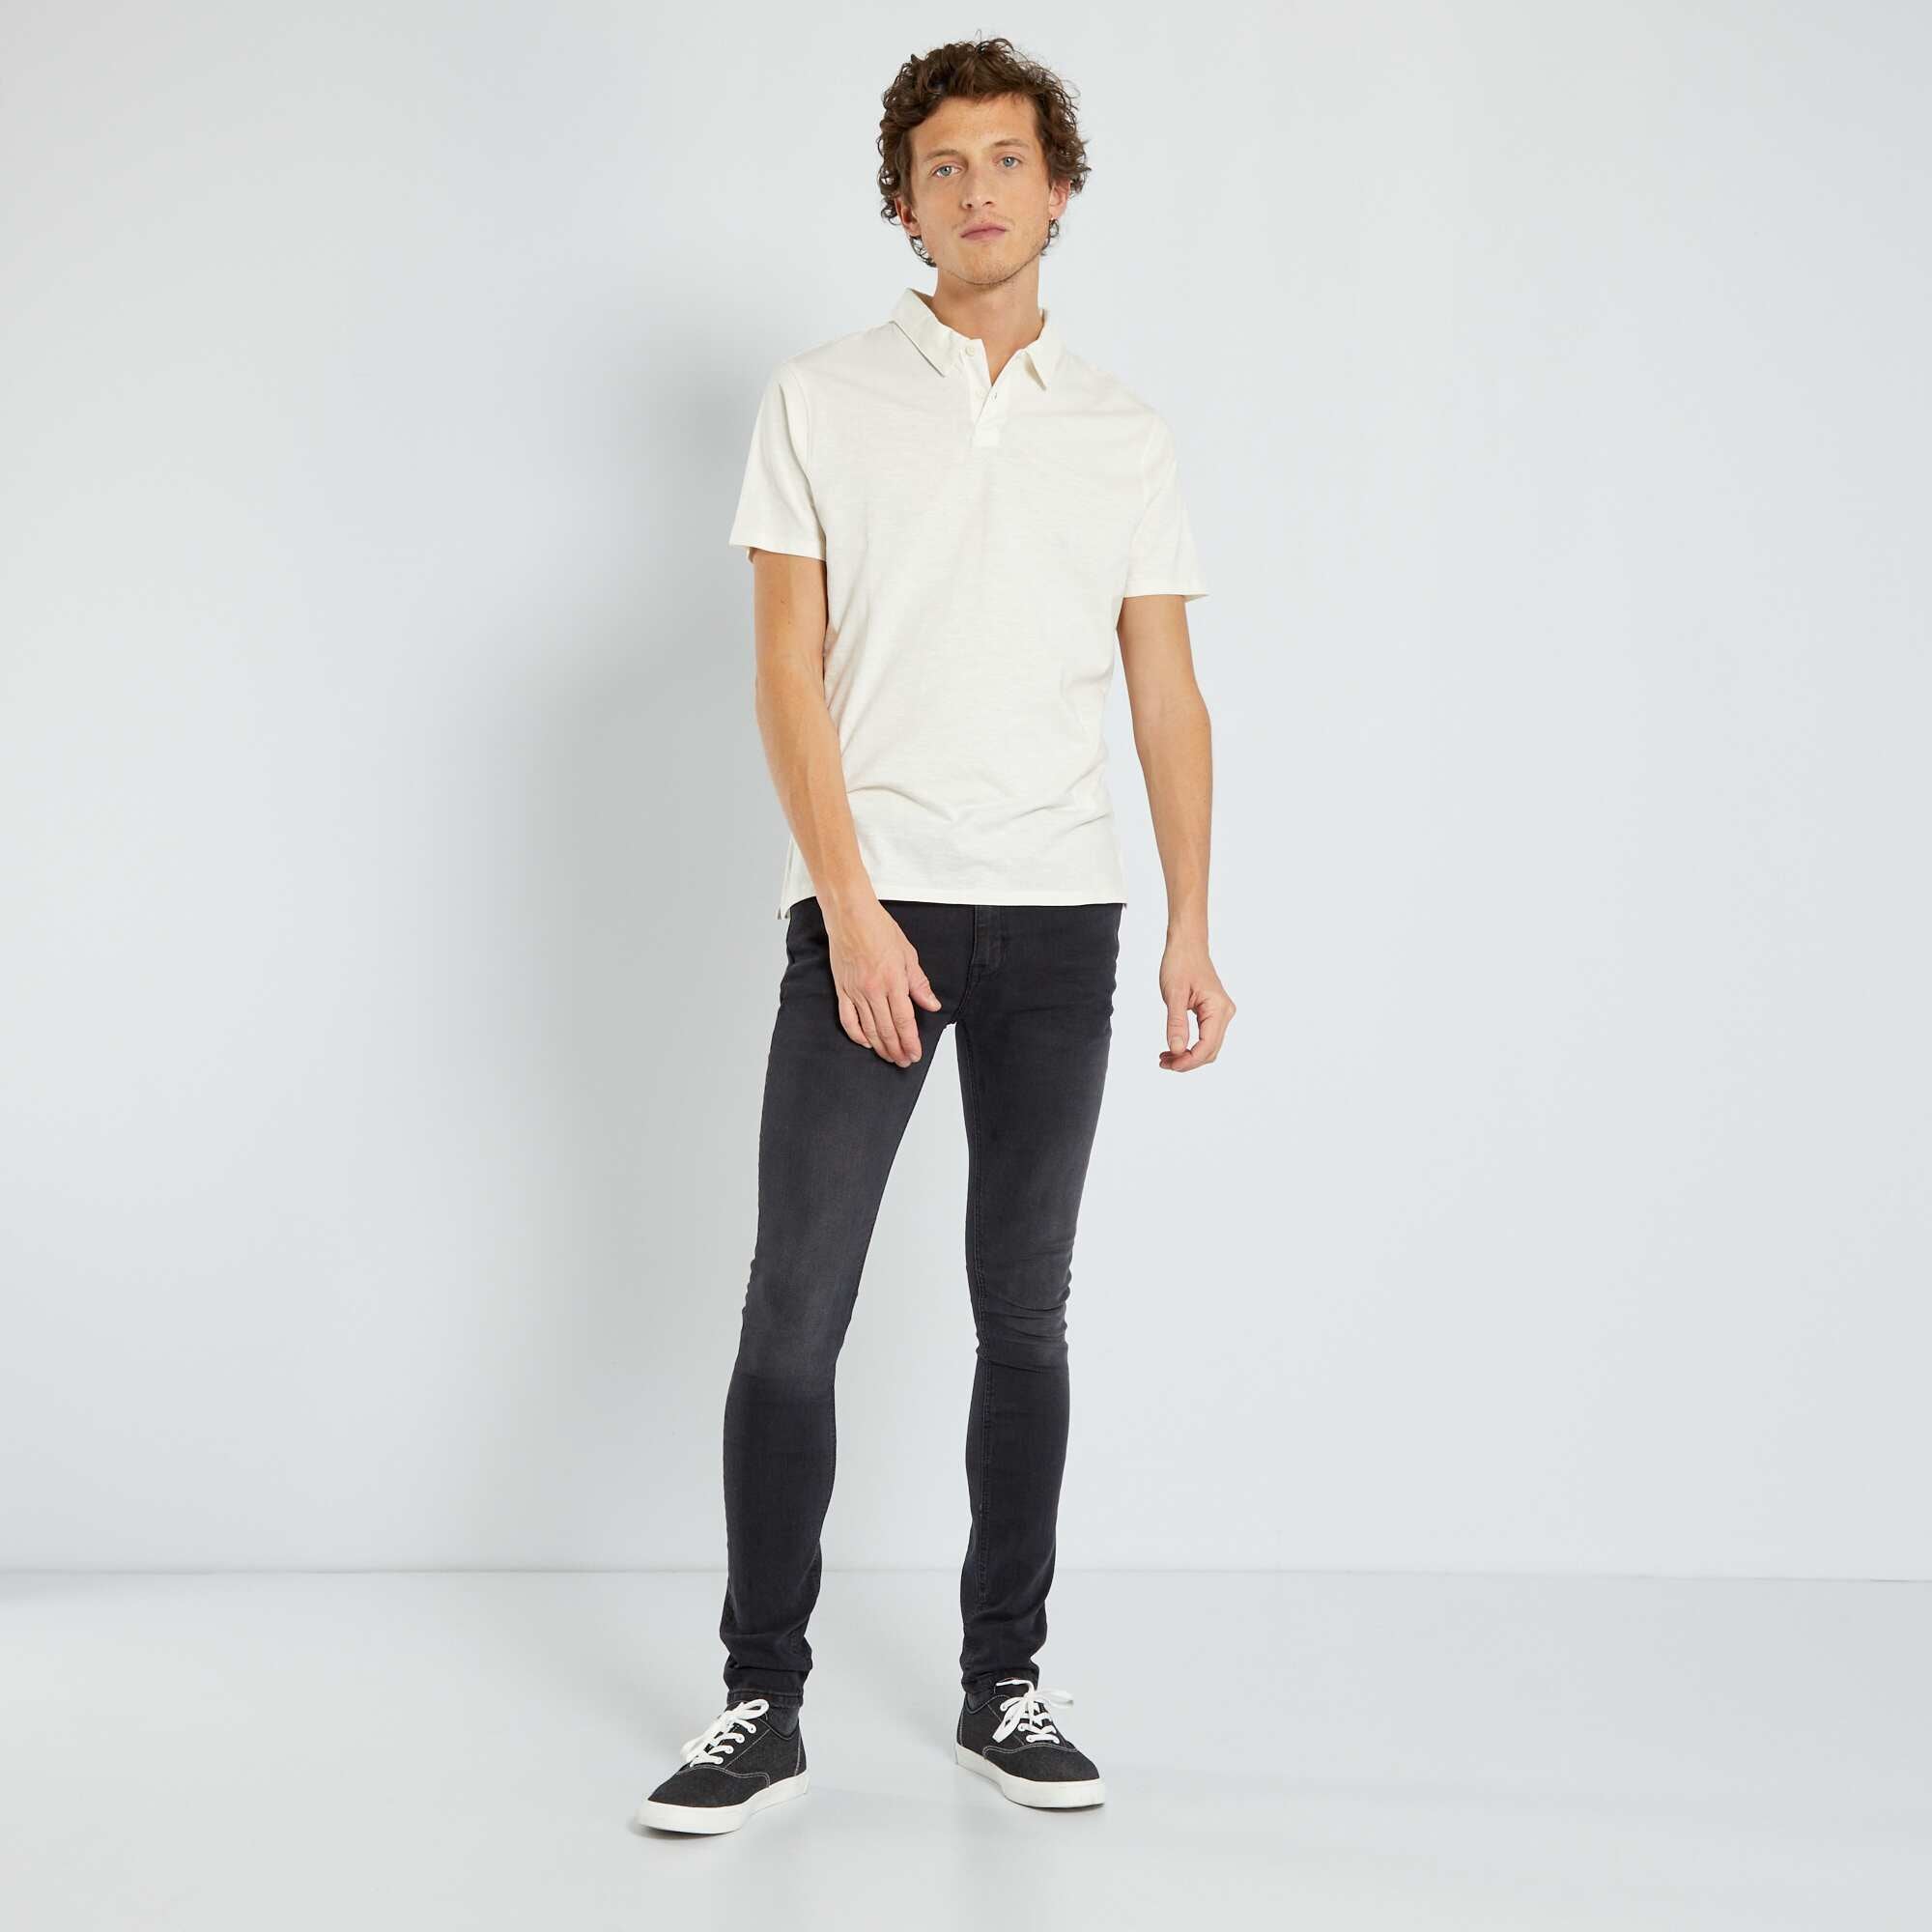 HOT Minimalist Street Style! White Polo Shirt, White Sneakers and Slim Fit  Chinos. Clean and Smart. Follow rickysturn/… | Mens outfits, Men casual,  White polo shirt